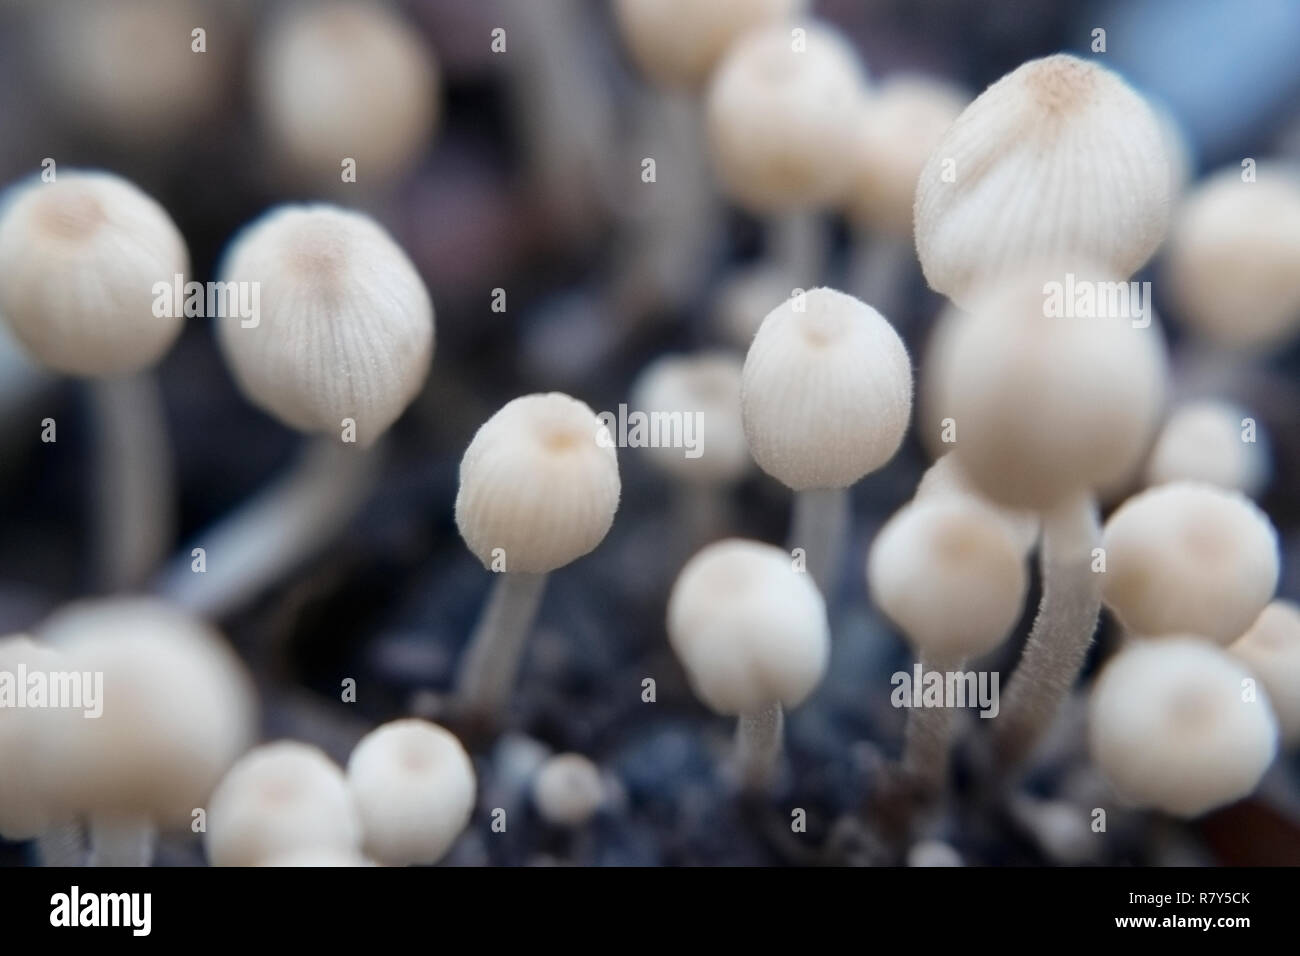 Very small inedible mushrooms of milky white color on a bed against a dark background Stock Photo